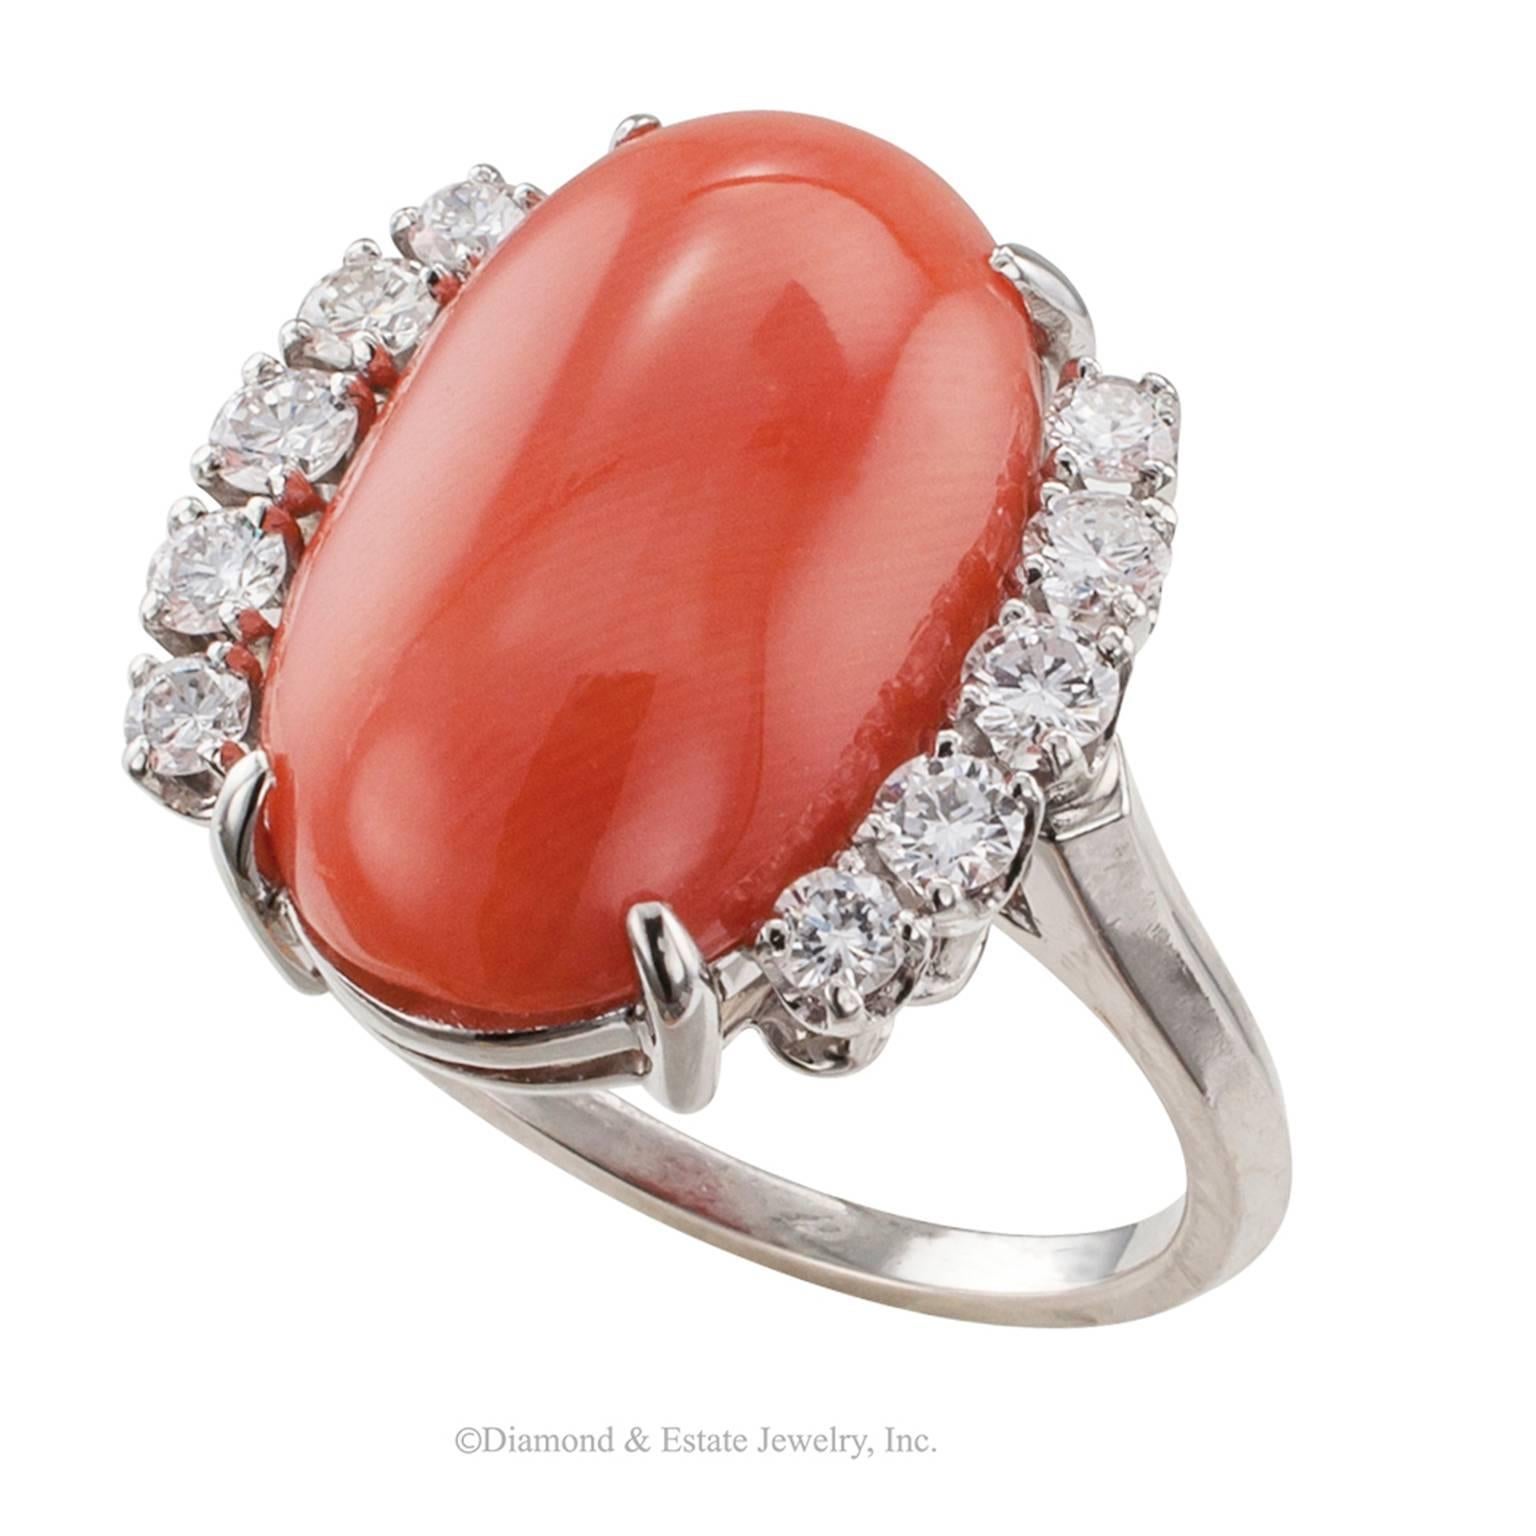 1970s Oval Coral Diamond Platinum Ring

1970s coral and diamond platinum ring.  Classic and fashionable design showcasing a moderate size, natural, oval coral displaying rich, beautiful deep orange-red color between shoulders set with round